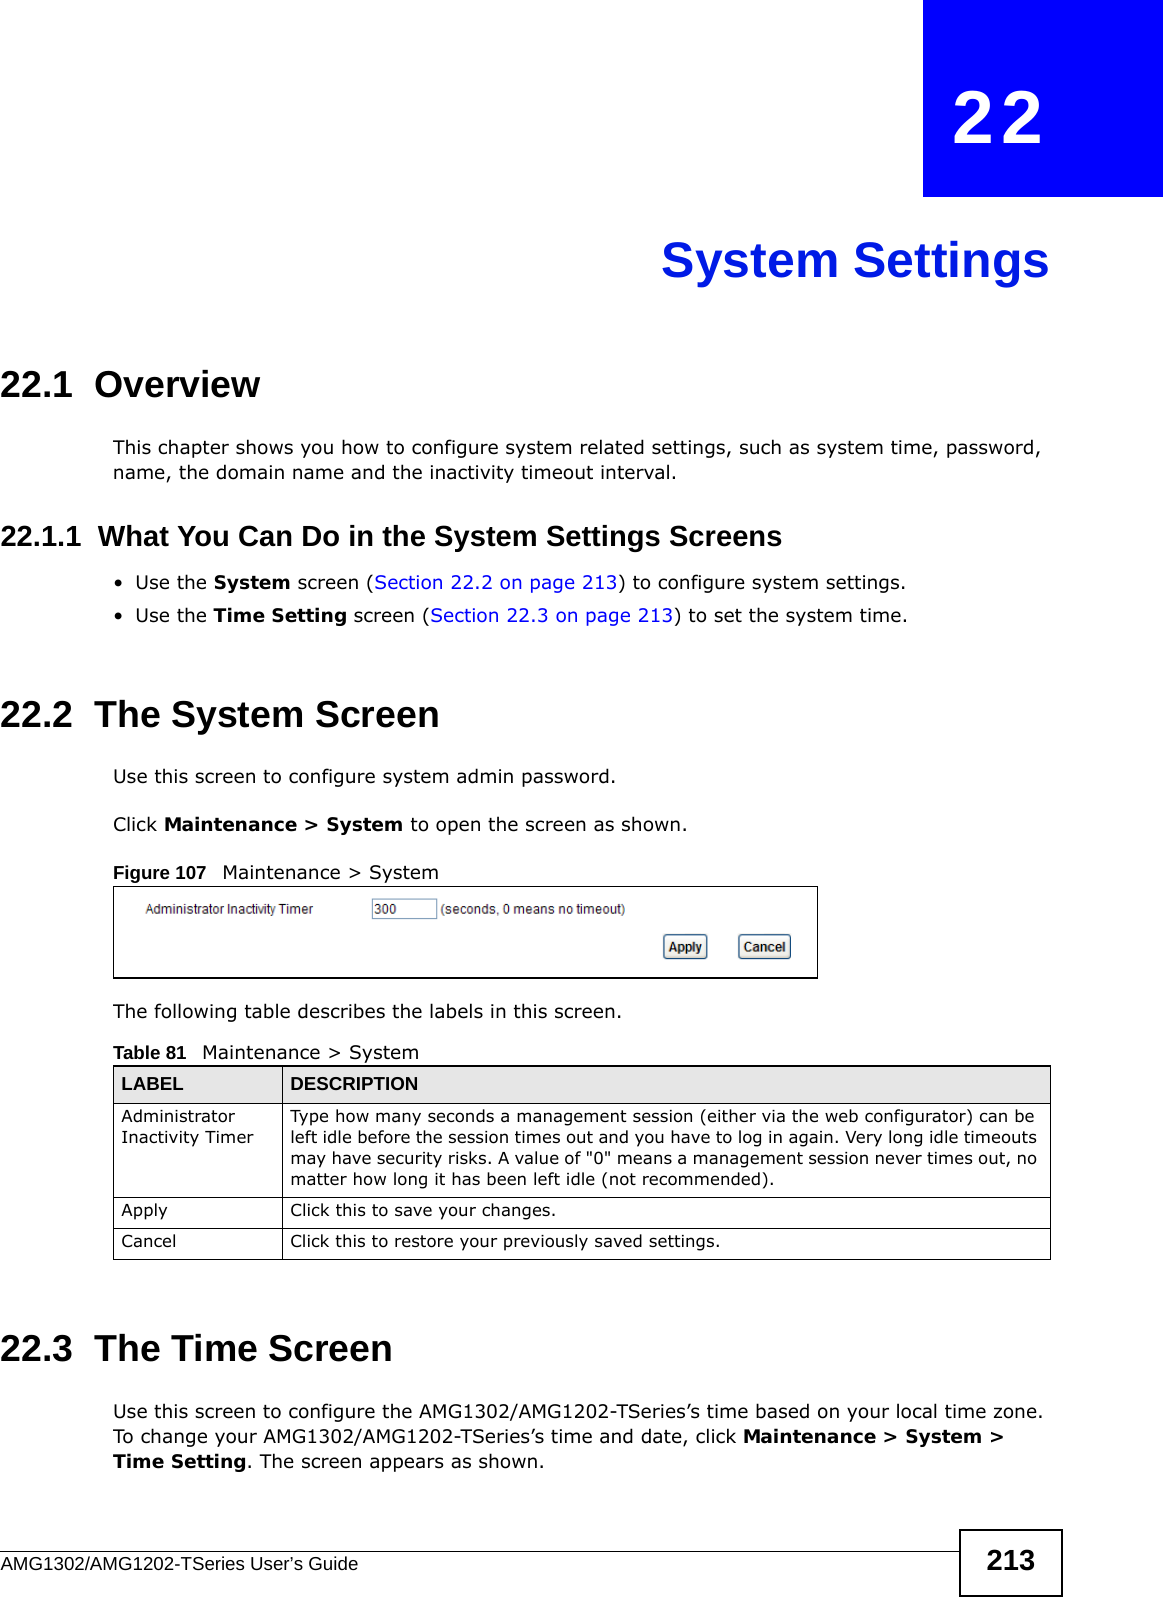 AMG1302/AMG1202-TSeries User’s Guide 213CHAPTER   22System Settings22.1  OverviewThis chapter shows you how to configure system related settings, such as system time, password, name, the domain name and the inactivity timeout interval.    22.1.1  What You Can Do in the System Settings Screens•Use the System screen (Section 22.2 on page 213) to configure system settings.•Use the Time Setting screen (Section 22.3 on page 213) to set the system time.22.2  The System ScreenUse this screen to configure system admin password.Click Maintenance &gt; System to open the screen as shown. Figure 107   Maintenance &gt; SystemThe following table describes the labels in this screen. 22.3  The Time Screen Use this screen to configure the AMG1302/AMG1202-TSeries’s time based on your local time zone. To change your AMG1302/AMG1202-TSeries’s time and date, click Maintenance &gt; System &gt; Time Setting. The screen appears as shown.Table 81   Maintenance &gt; SystemLABEL DESCRIPTIONAdministrator Inactivity TimerType how many seconds a management session (either via the web configurator) can be left idle before the session times out and you have to log in again. Very long idle timeouts may have security risks. A value of &quot;0&quot; means a management session never times out, no matter how long it has been left idle (not recommended).Apply Click this to save your changes.Cancel Click this to restore your previously saved settings.